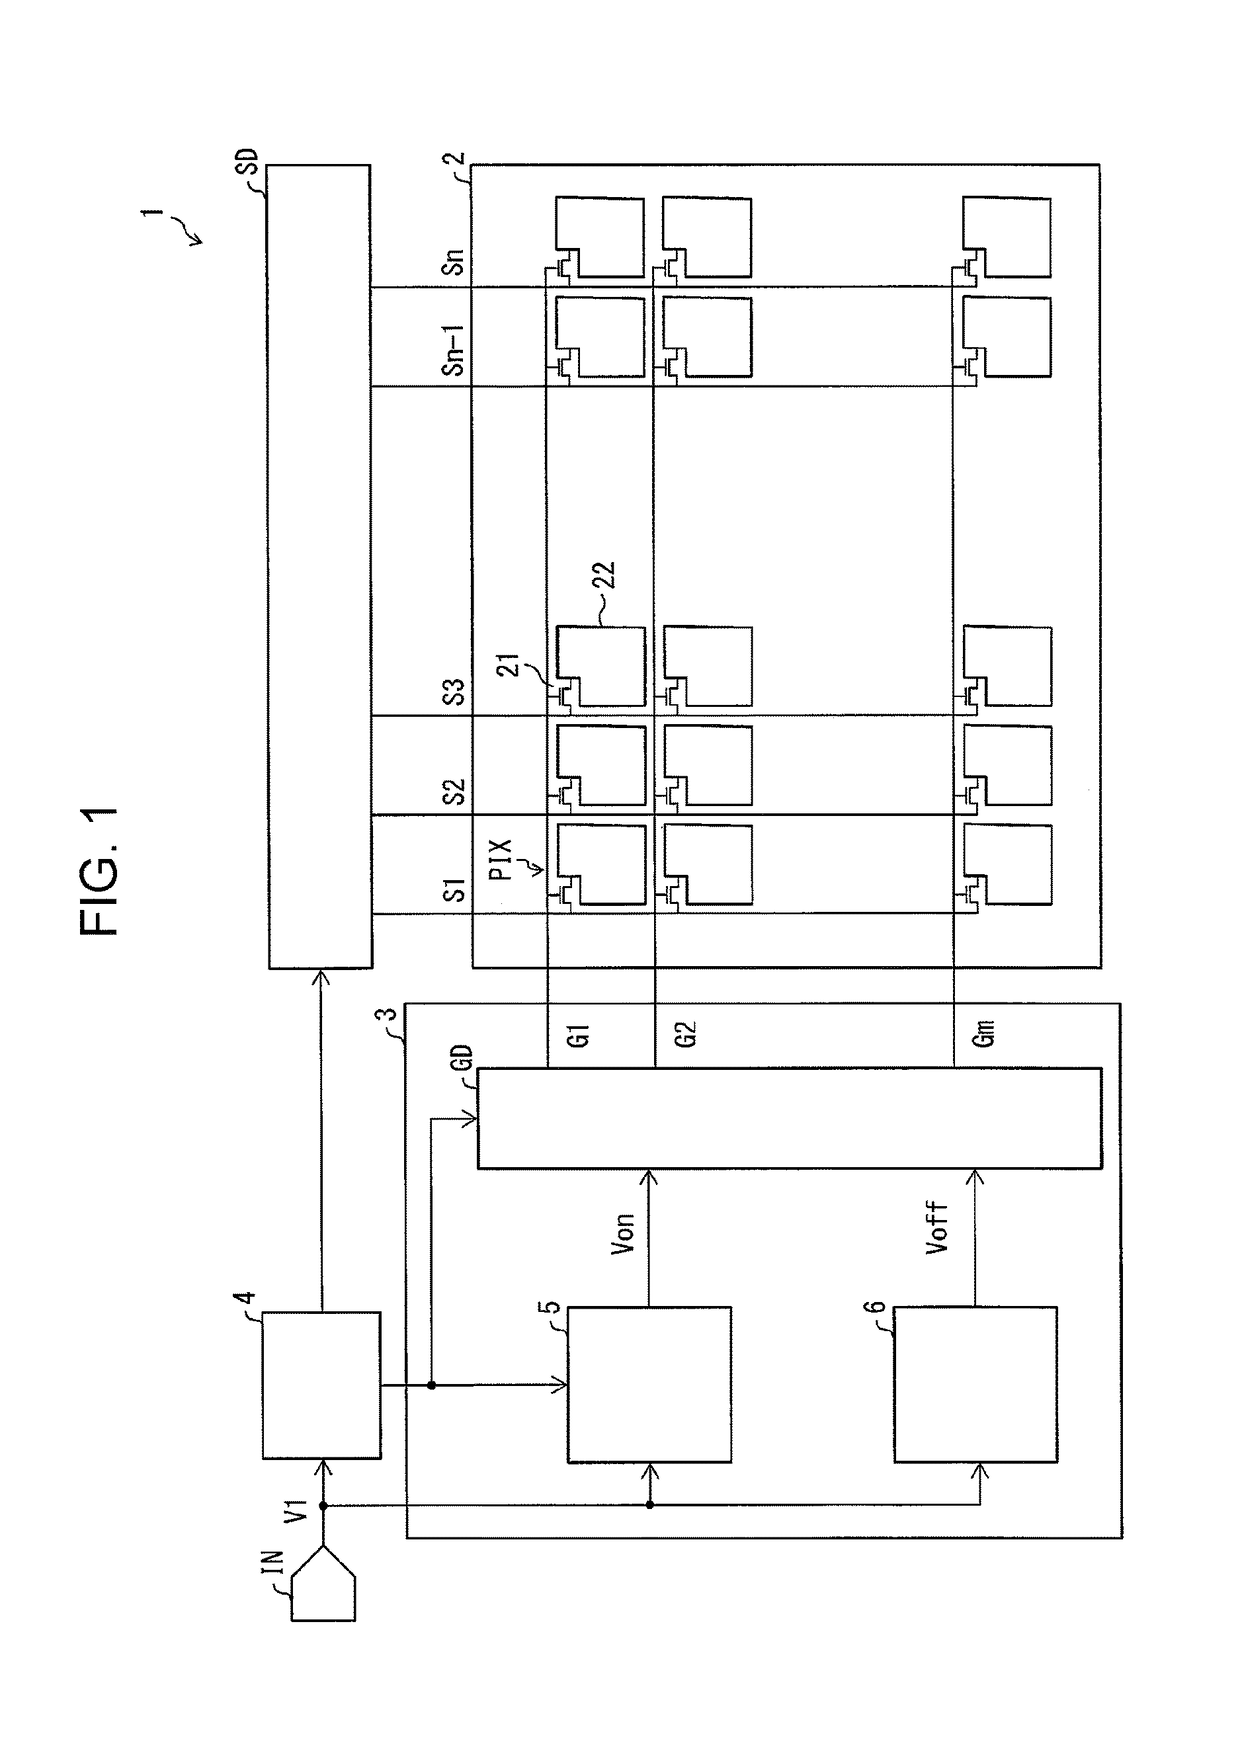 Display apparatus with waveform adjuster generating switch control signal by switching between grounded state and ungrounded state